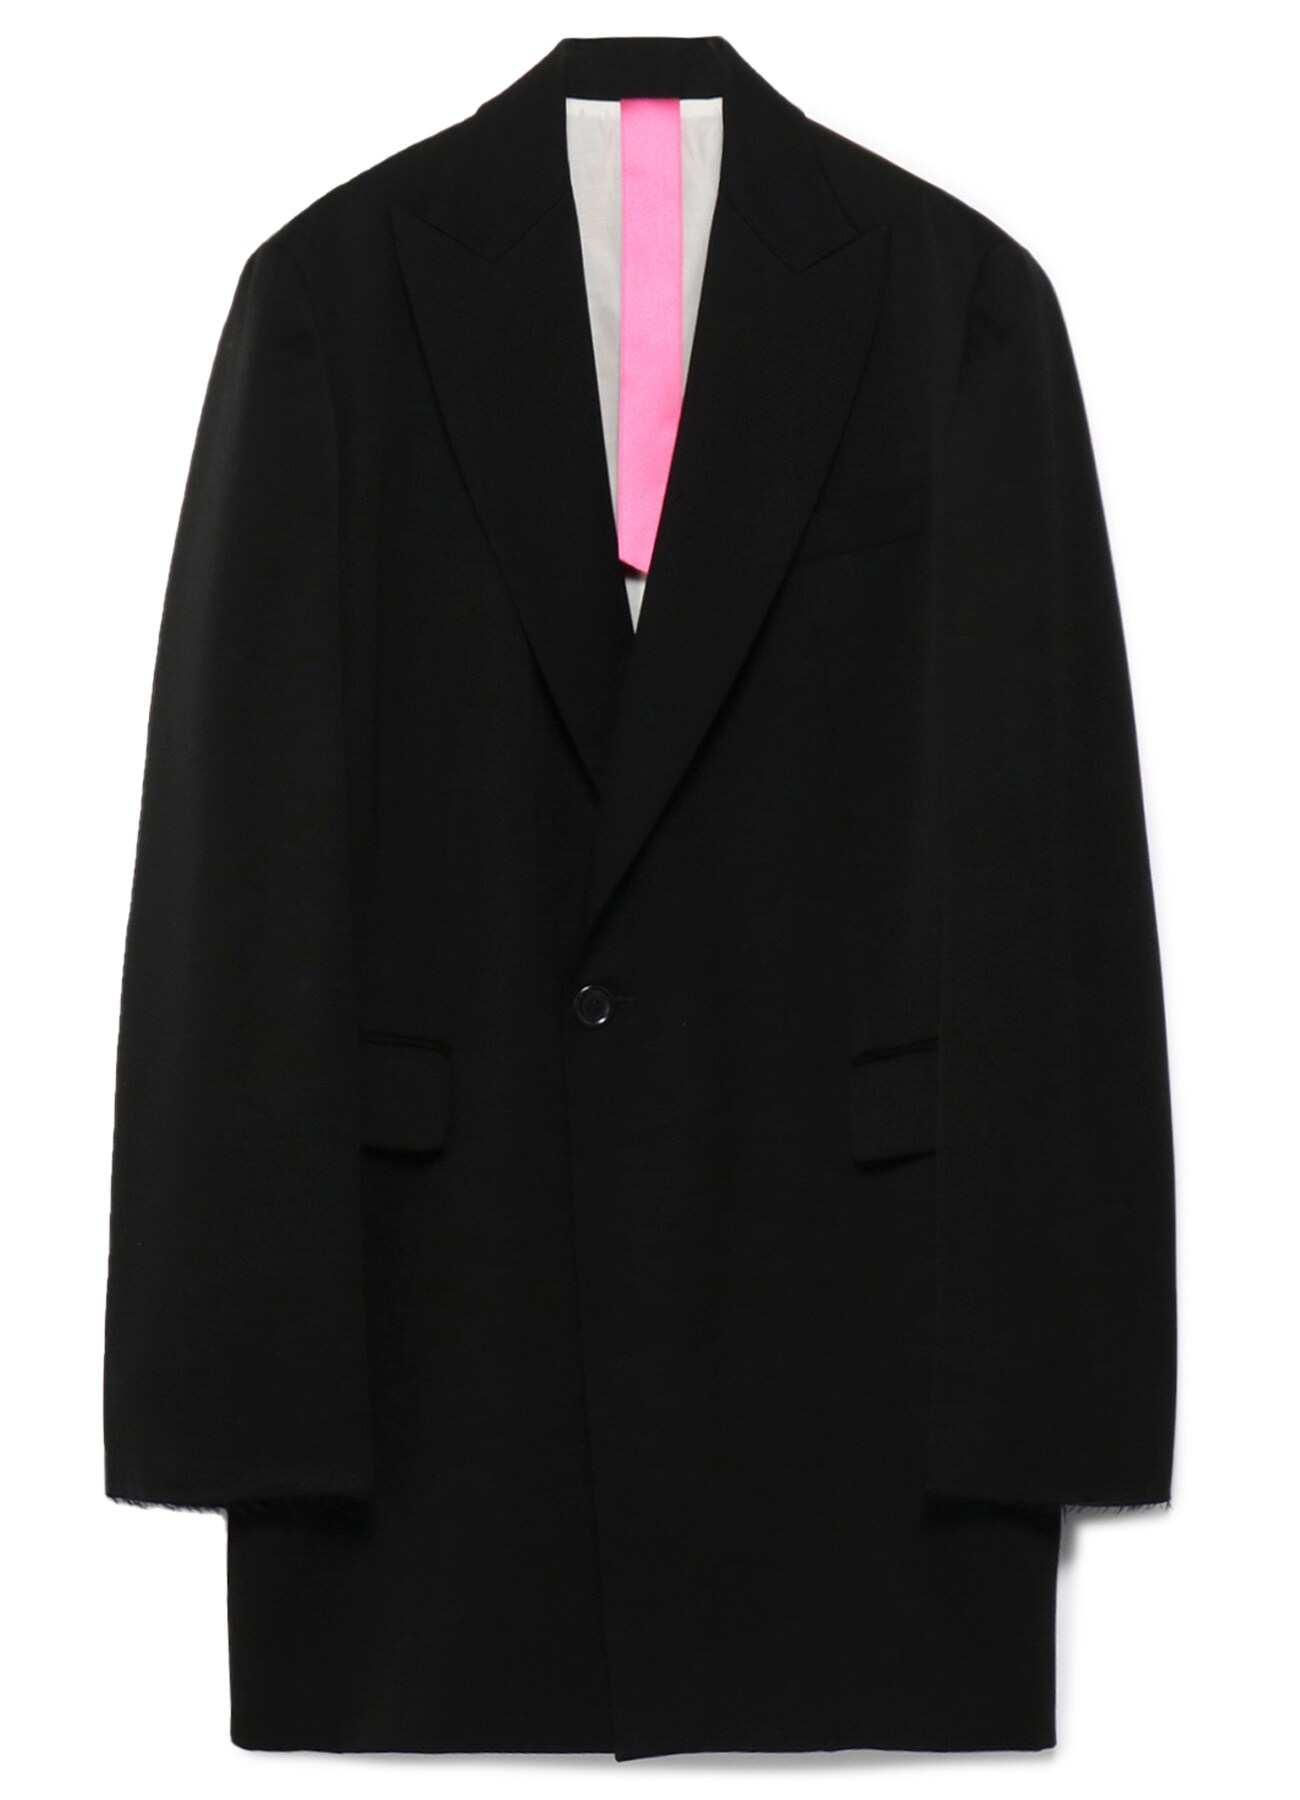 Y'sPINK TUXEDO CLOTH TAILORED JACKET